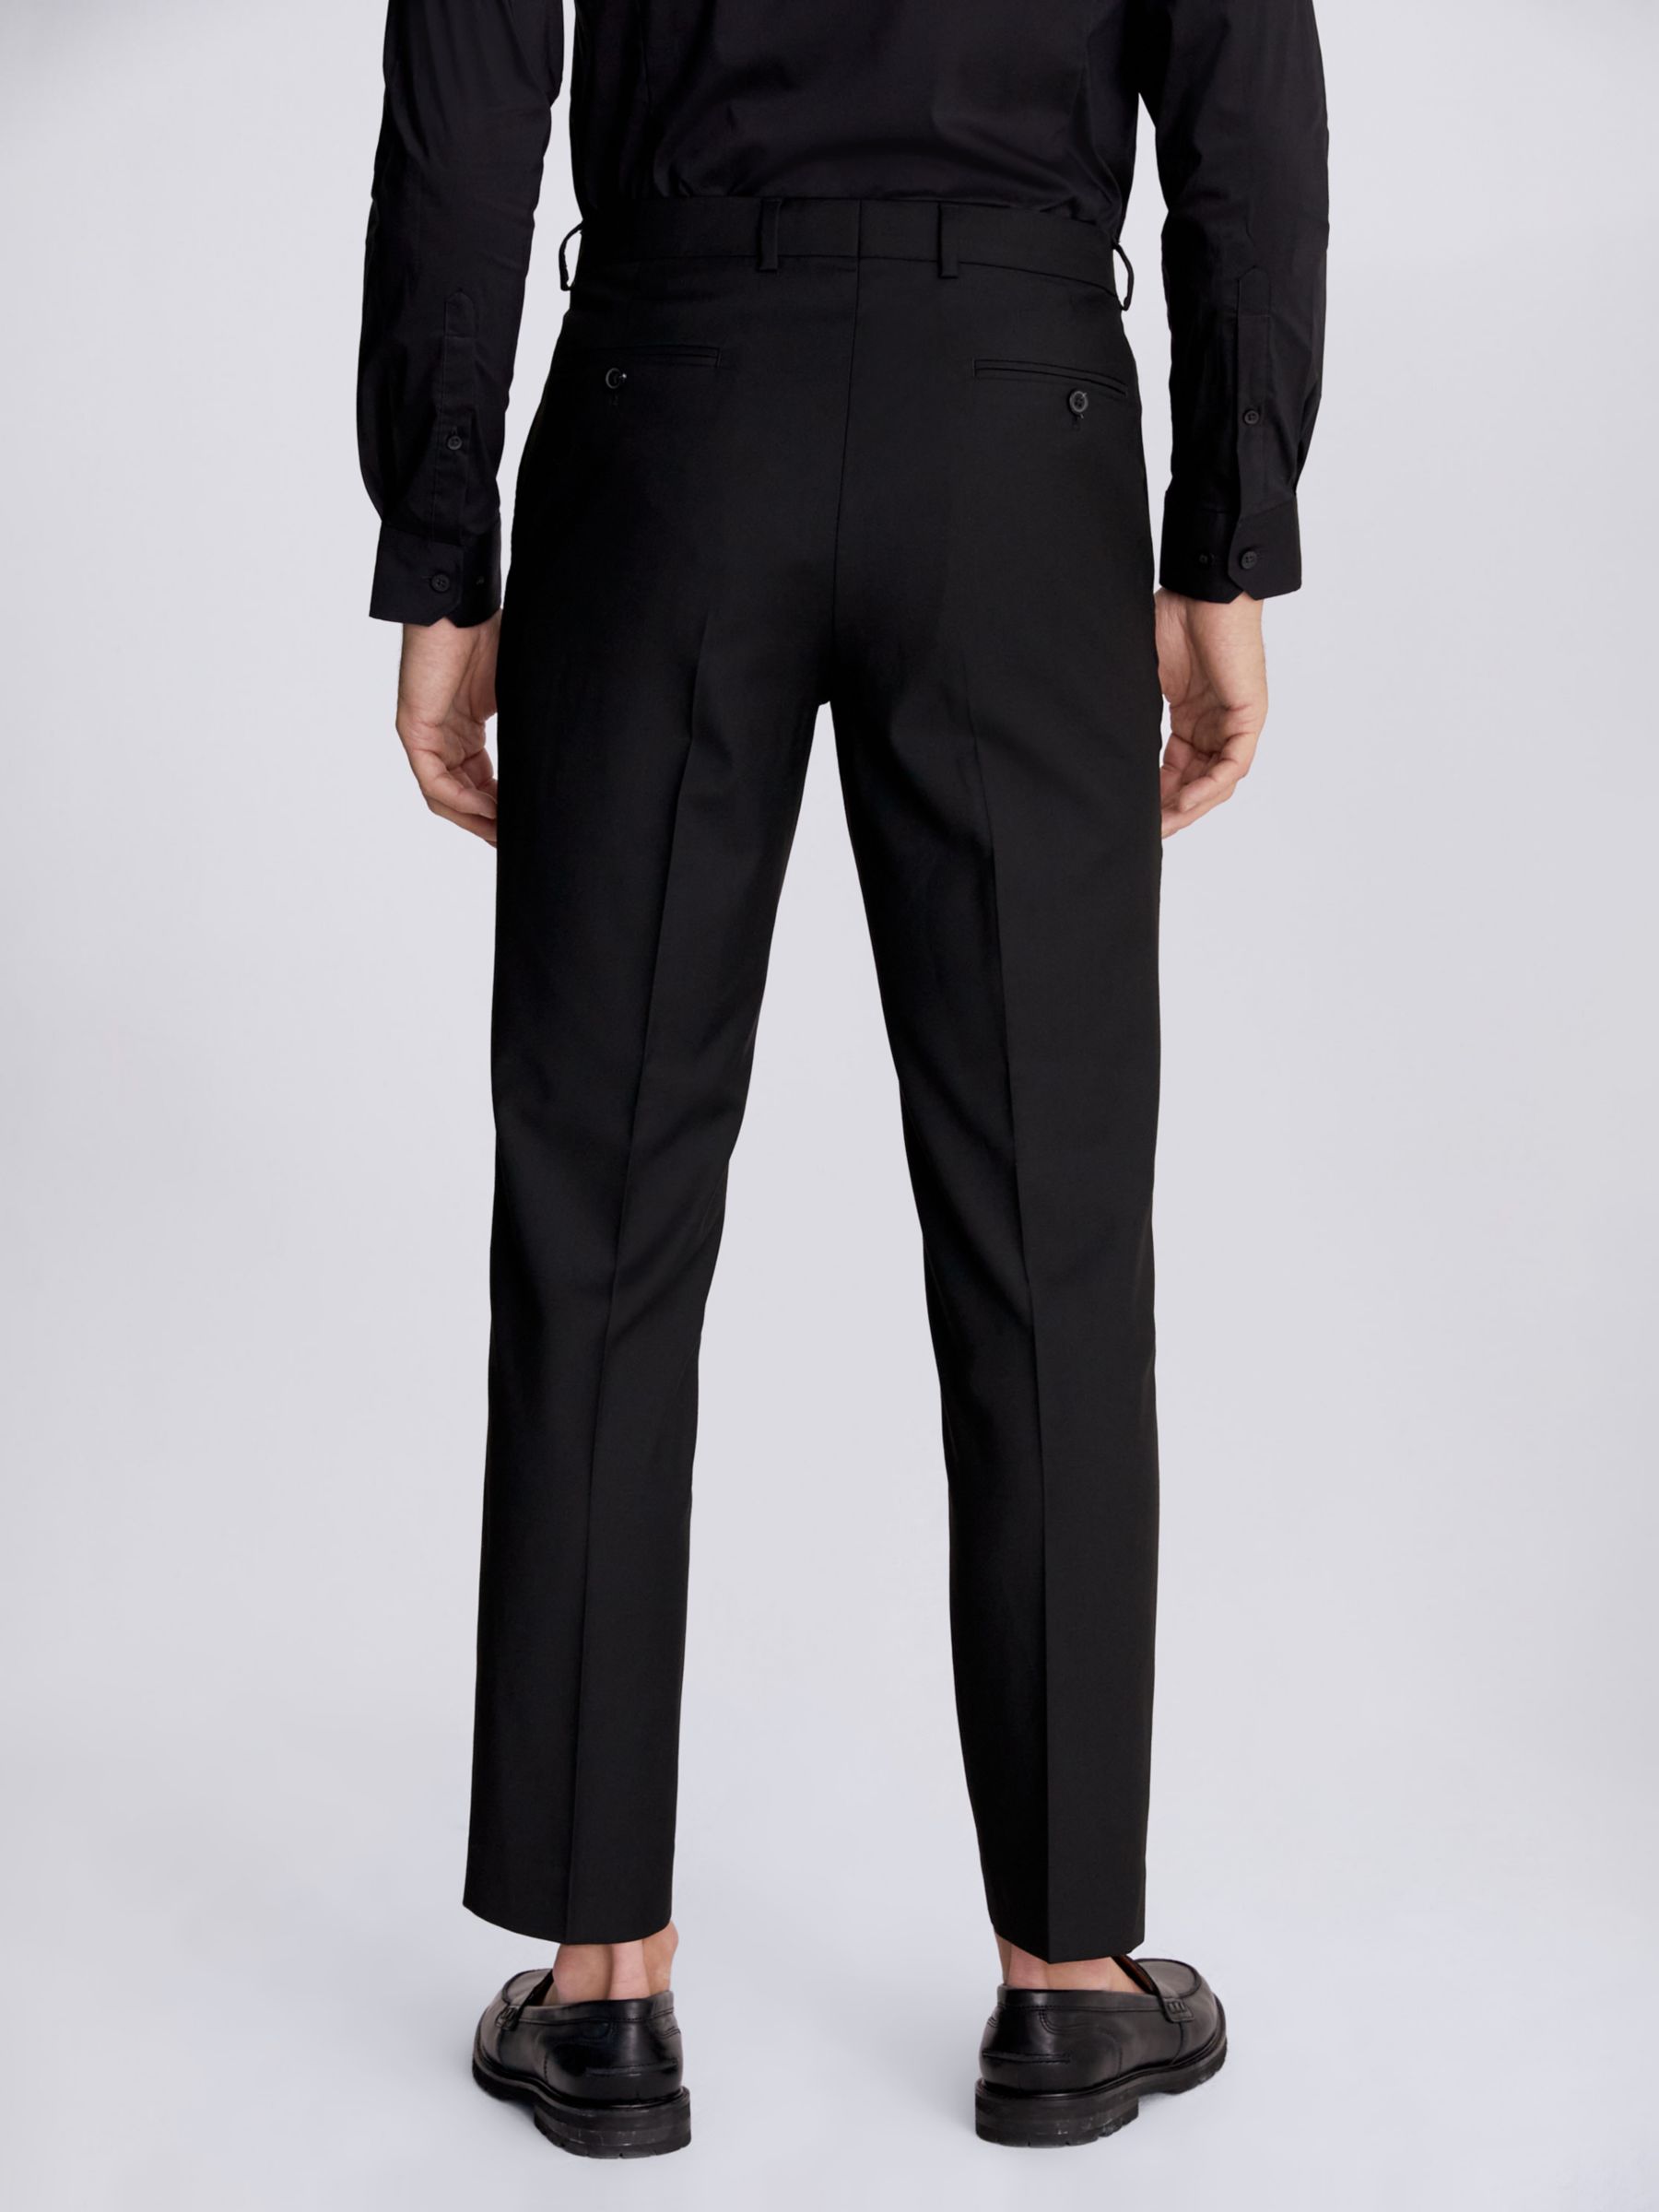 Buy Moss Regular Fit Stretch Suit Trousers Online at johnlewis.com